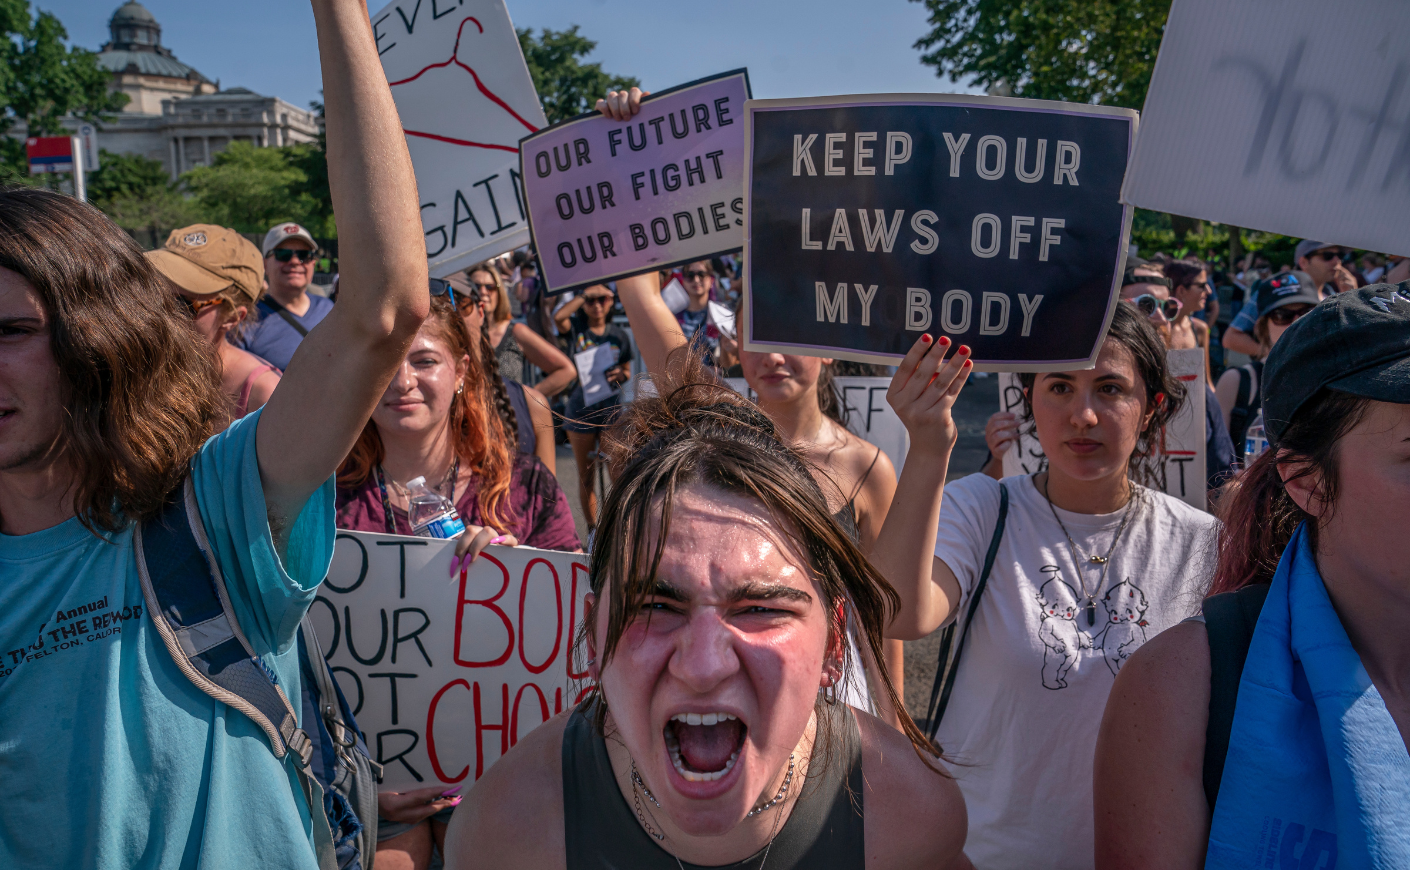 Abortion-rights activists demonstrate in Washington, D.C., on June 26, 2022. (Getty Images)